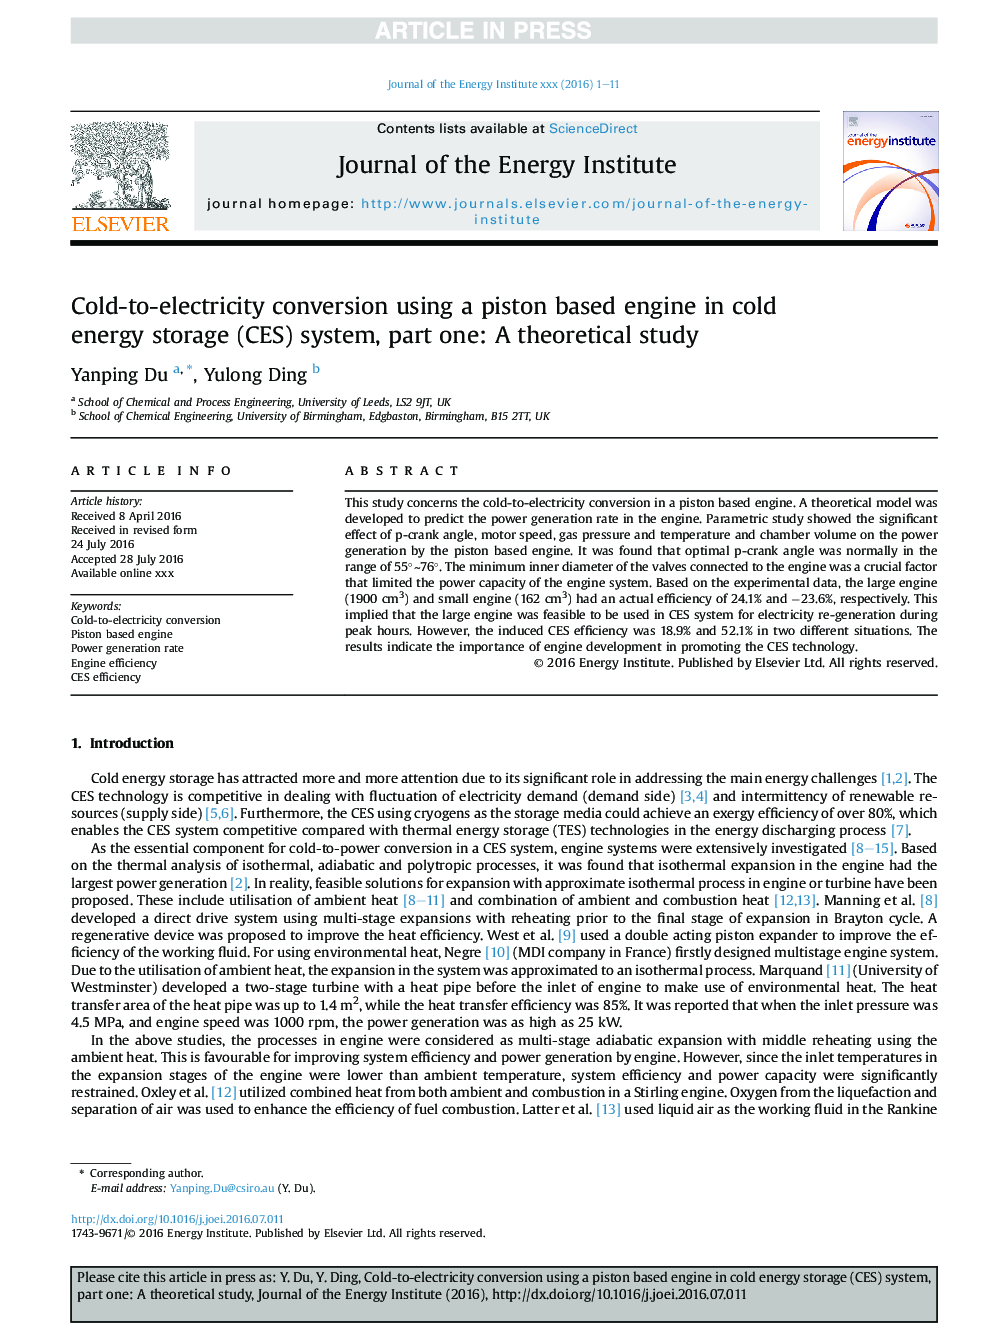 Cold-to-electricity conversion using a piston based engine in cold energy storage (CES) system, part one: A theoretical study